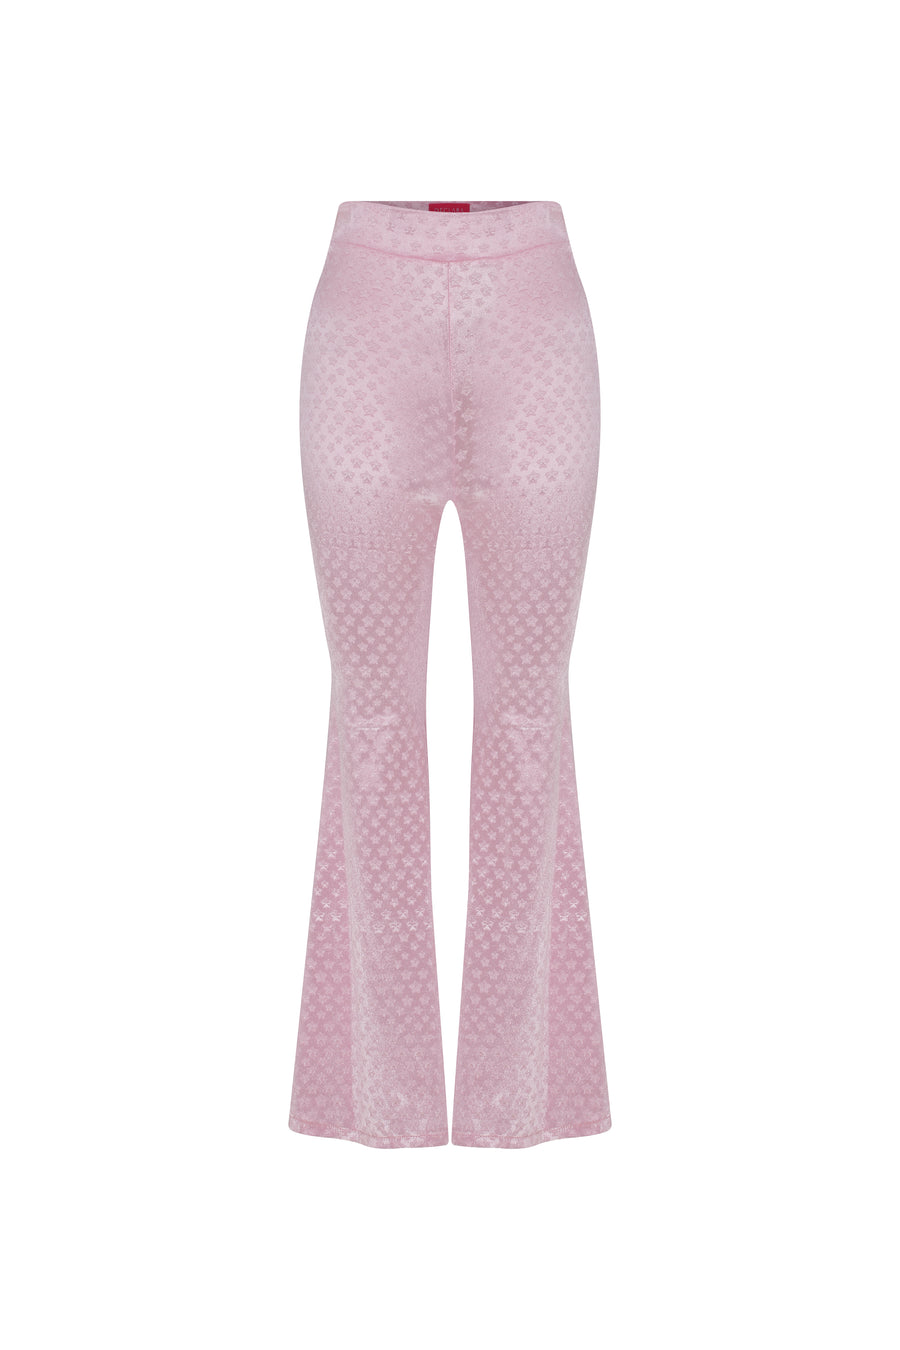 Starry Pink Pant